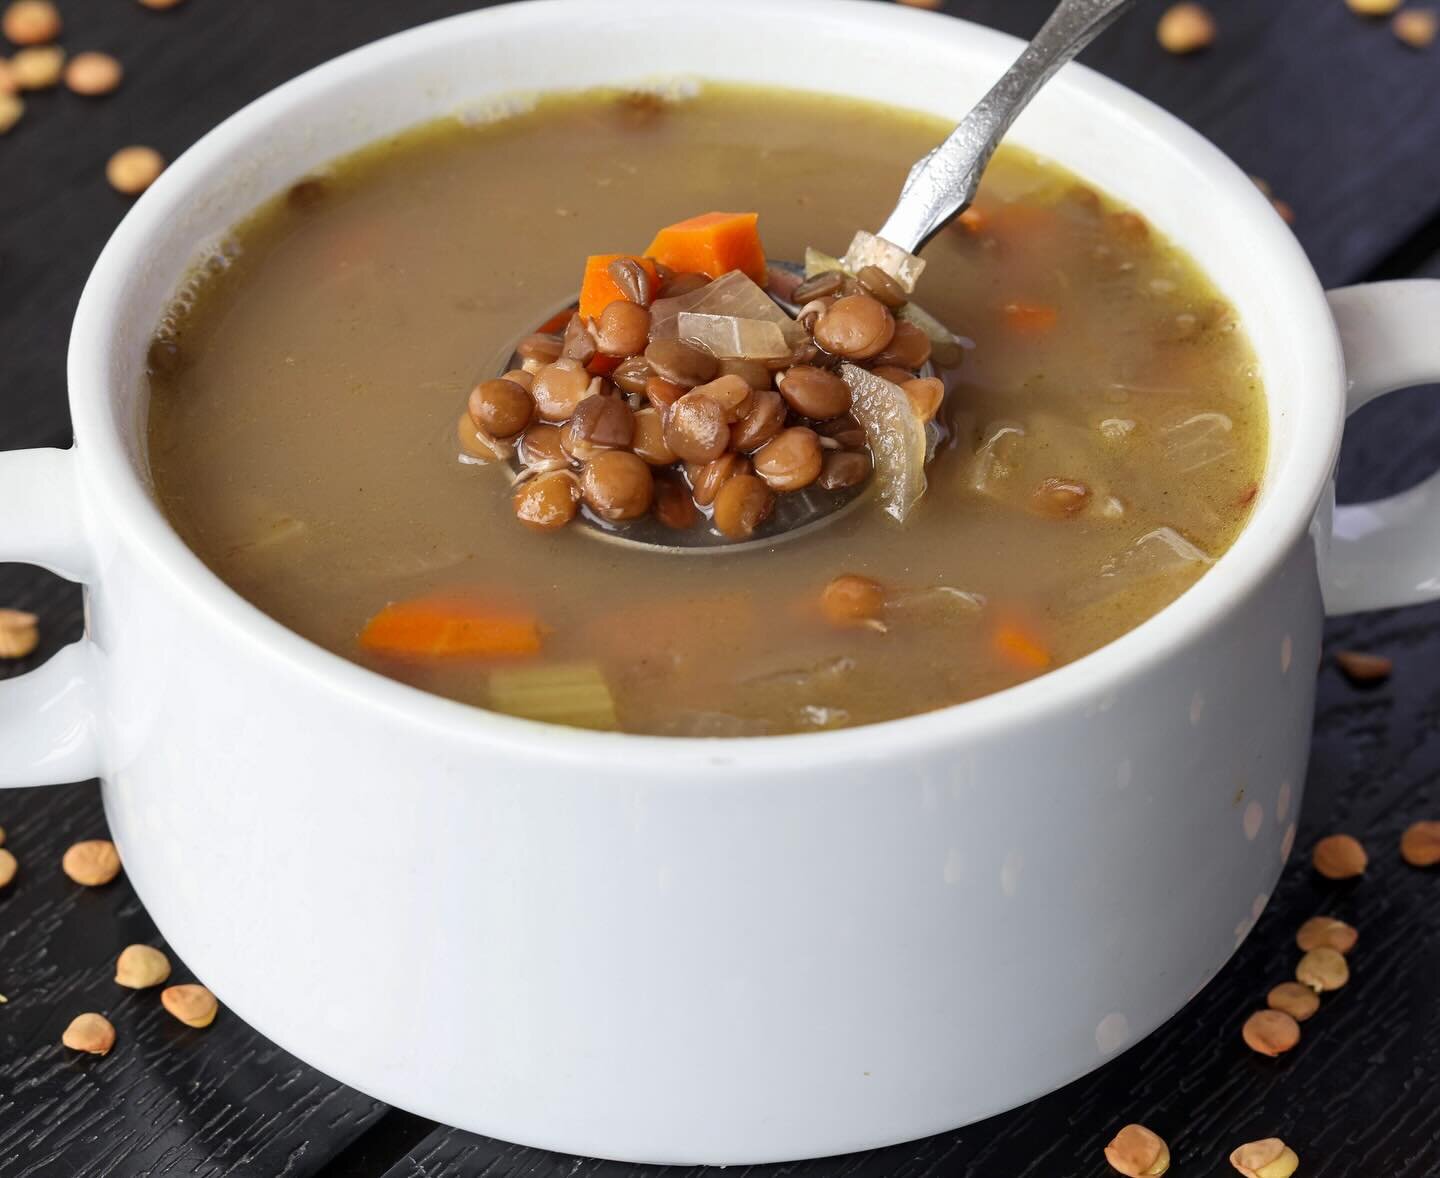 🌱 Our Vegan Sprouted Lentil Soup is Back 🌱

Our beloved Lentil Soup is back on the menu for the season! Dive into a bowl of comfort made with organic sprouted green lentils which offer the benefits of improved digestion and nutrient absorption.

Ea